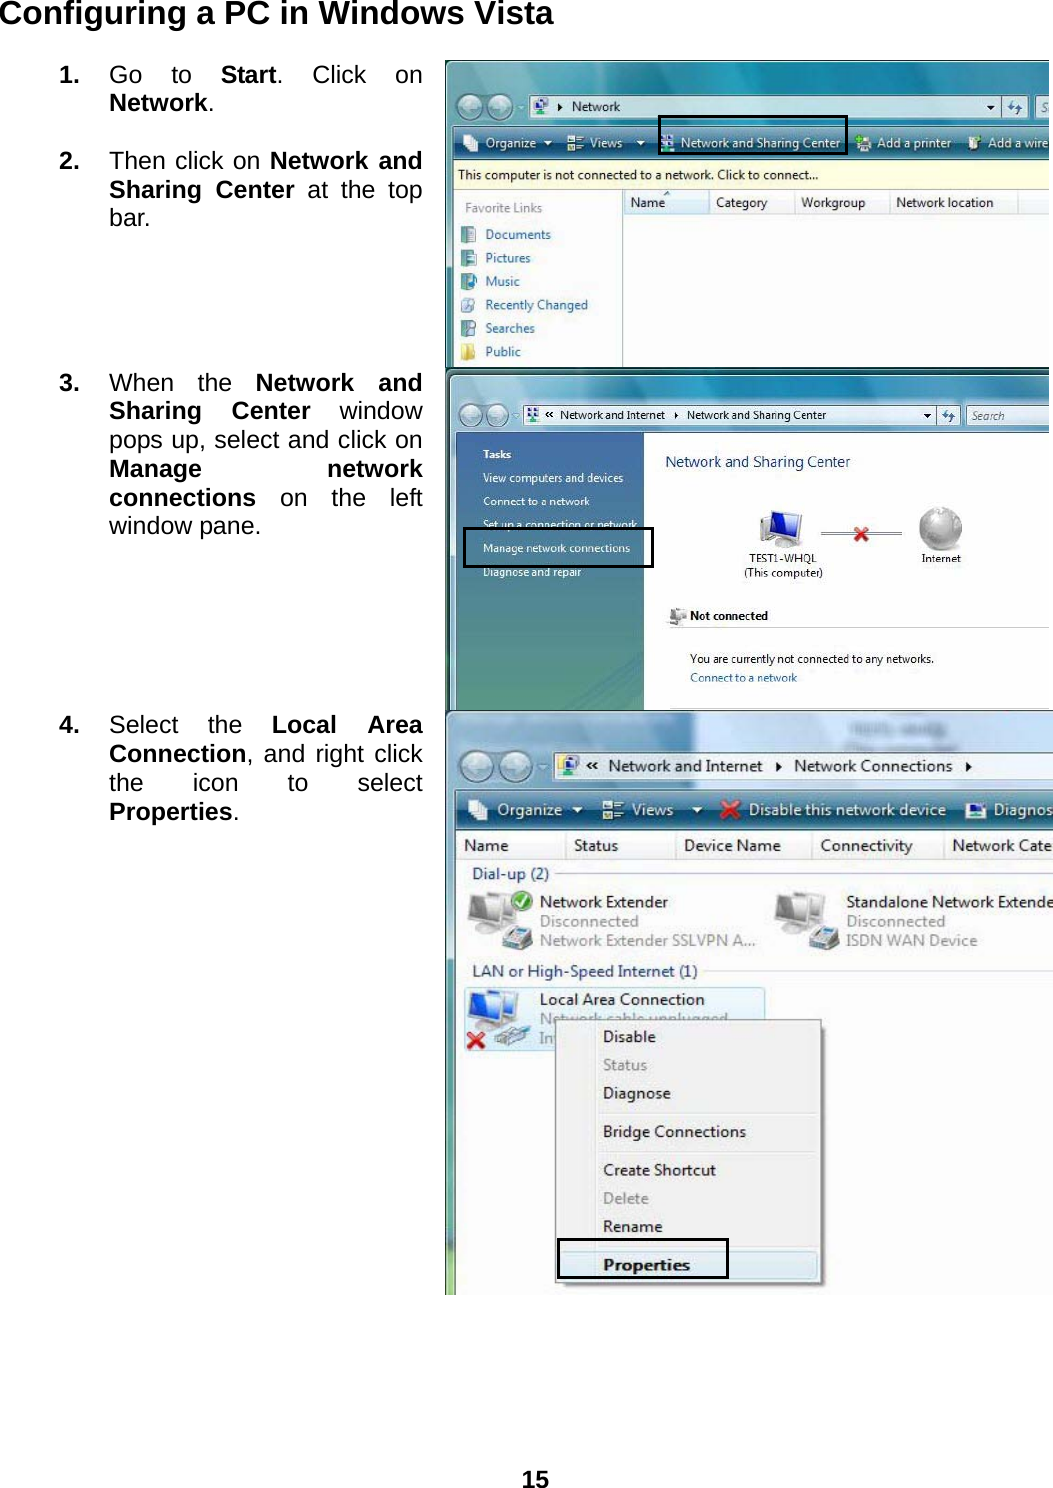  15 Configuring a PC in Windows Vista      1.  Go to Start. Click on Network.  2.  Then click on Network and Sharing Center at the top bar. 3.  When the Network and Sharing Center window pops up, select and click on Manage network connections on the left window pane. 4.  Select the Local Area Connection, and right click the icon to select Properties. 